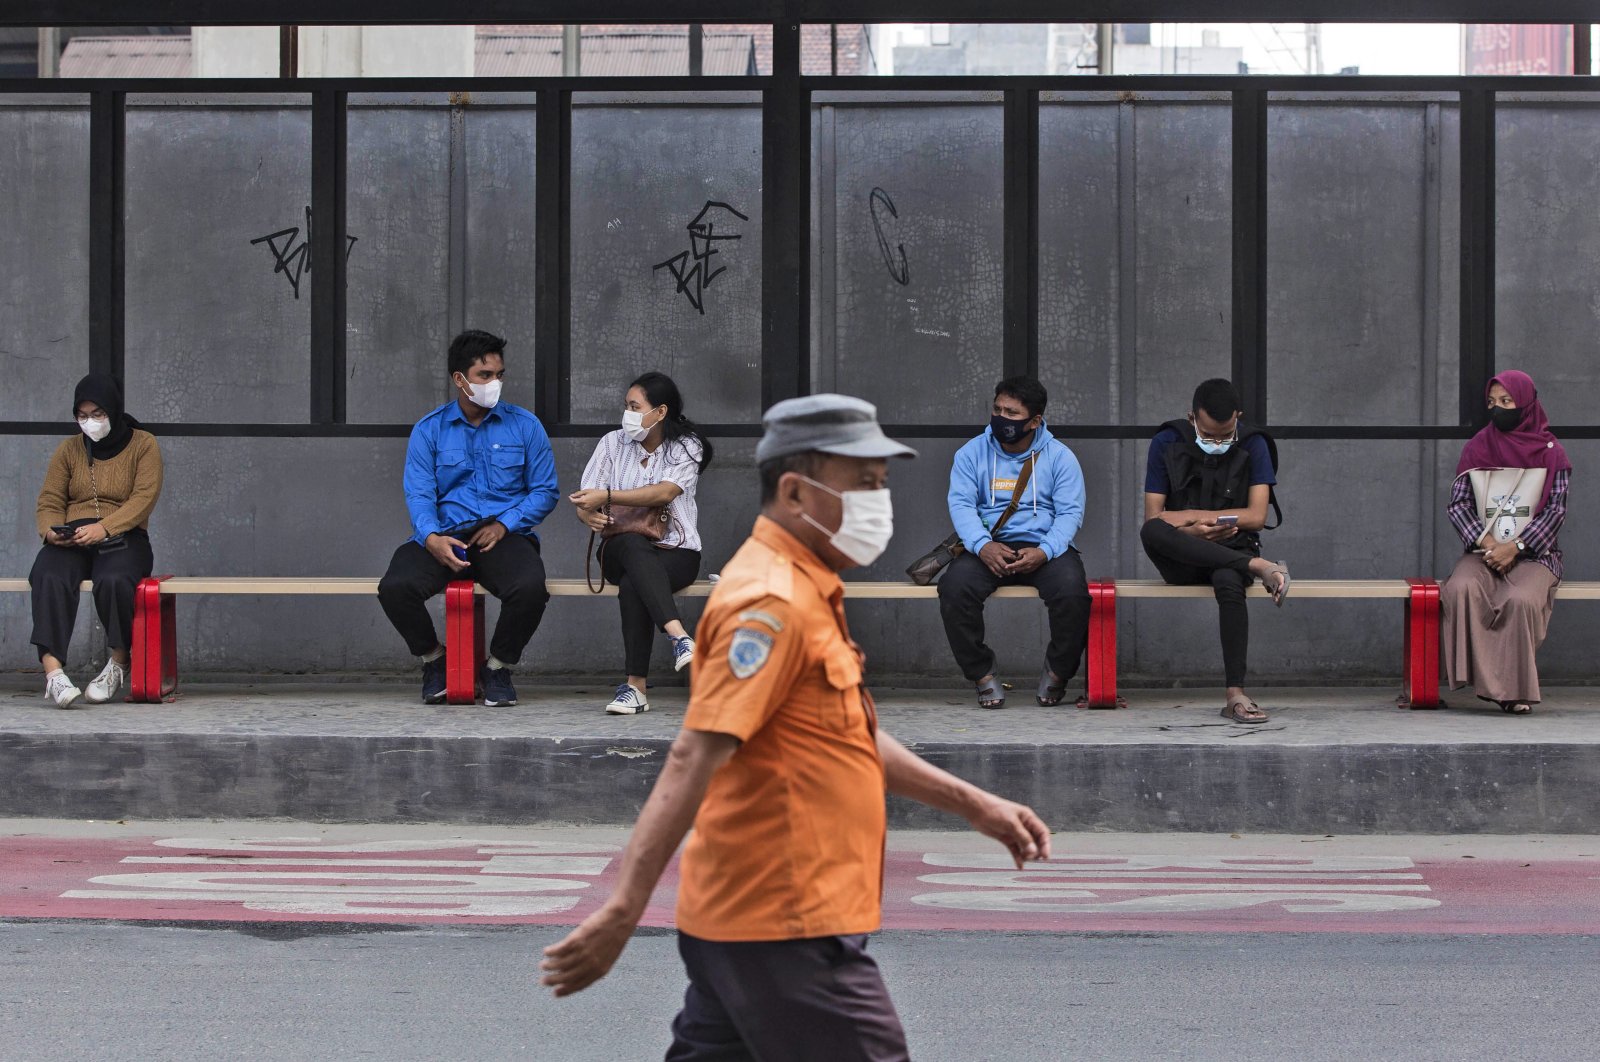 People wearing masks to help curb the spread of the COVID-19 outbreak sit at a bus stop in Medan, North Sumatra, Indonesia, Jan. 29, 2022. (AP Photo)